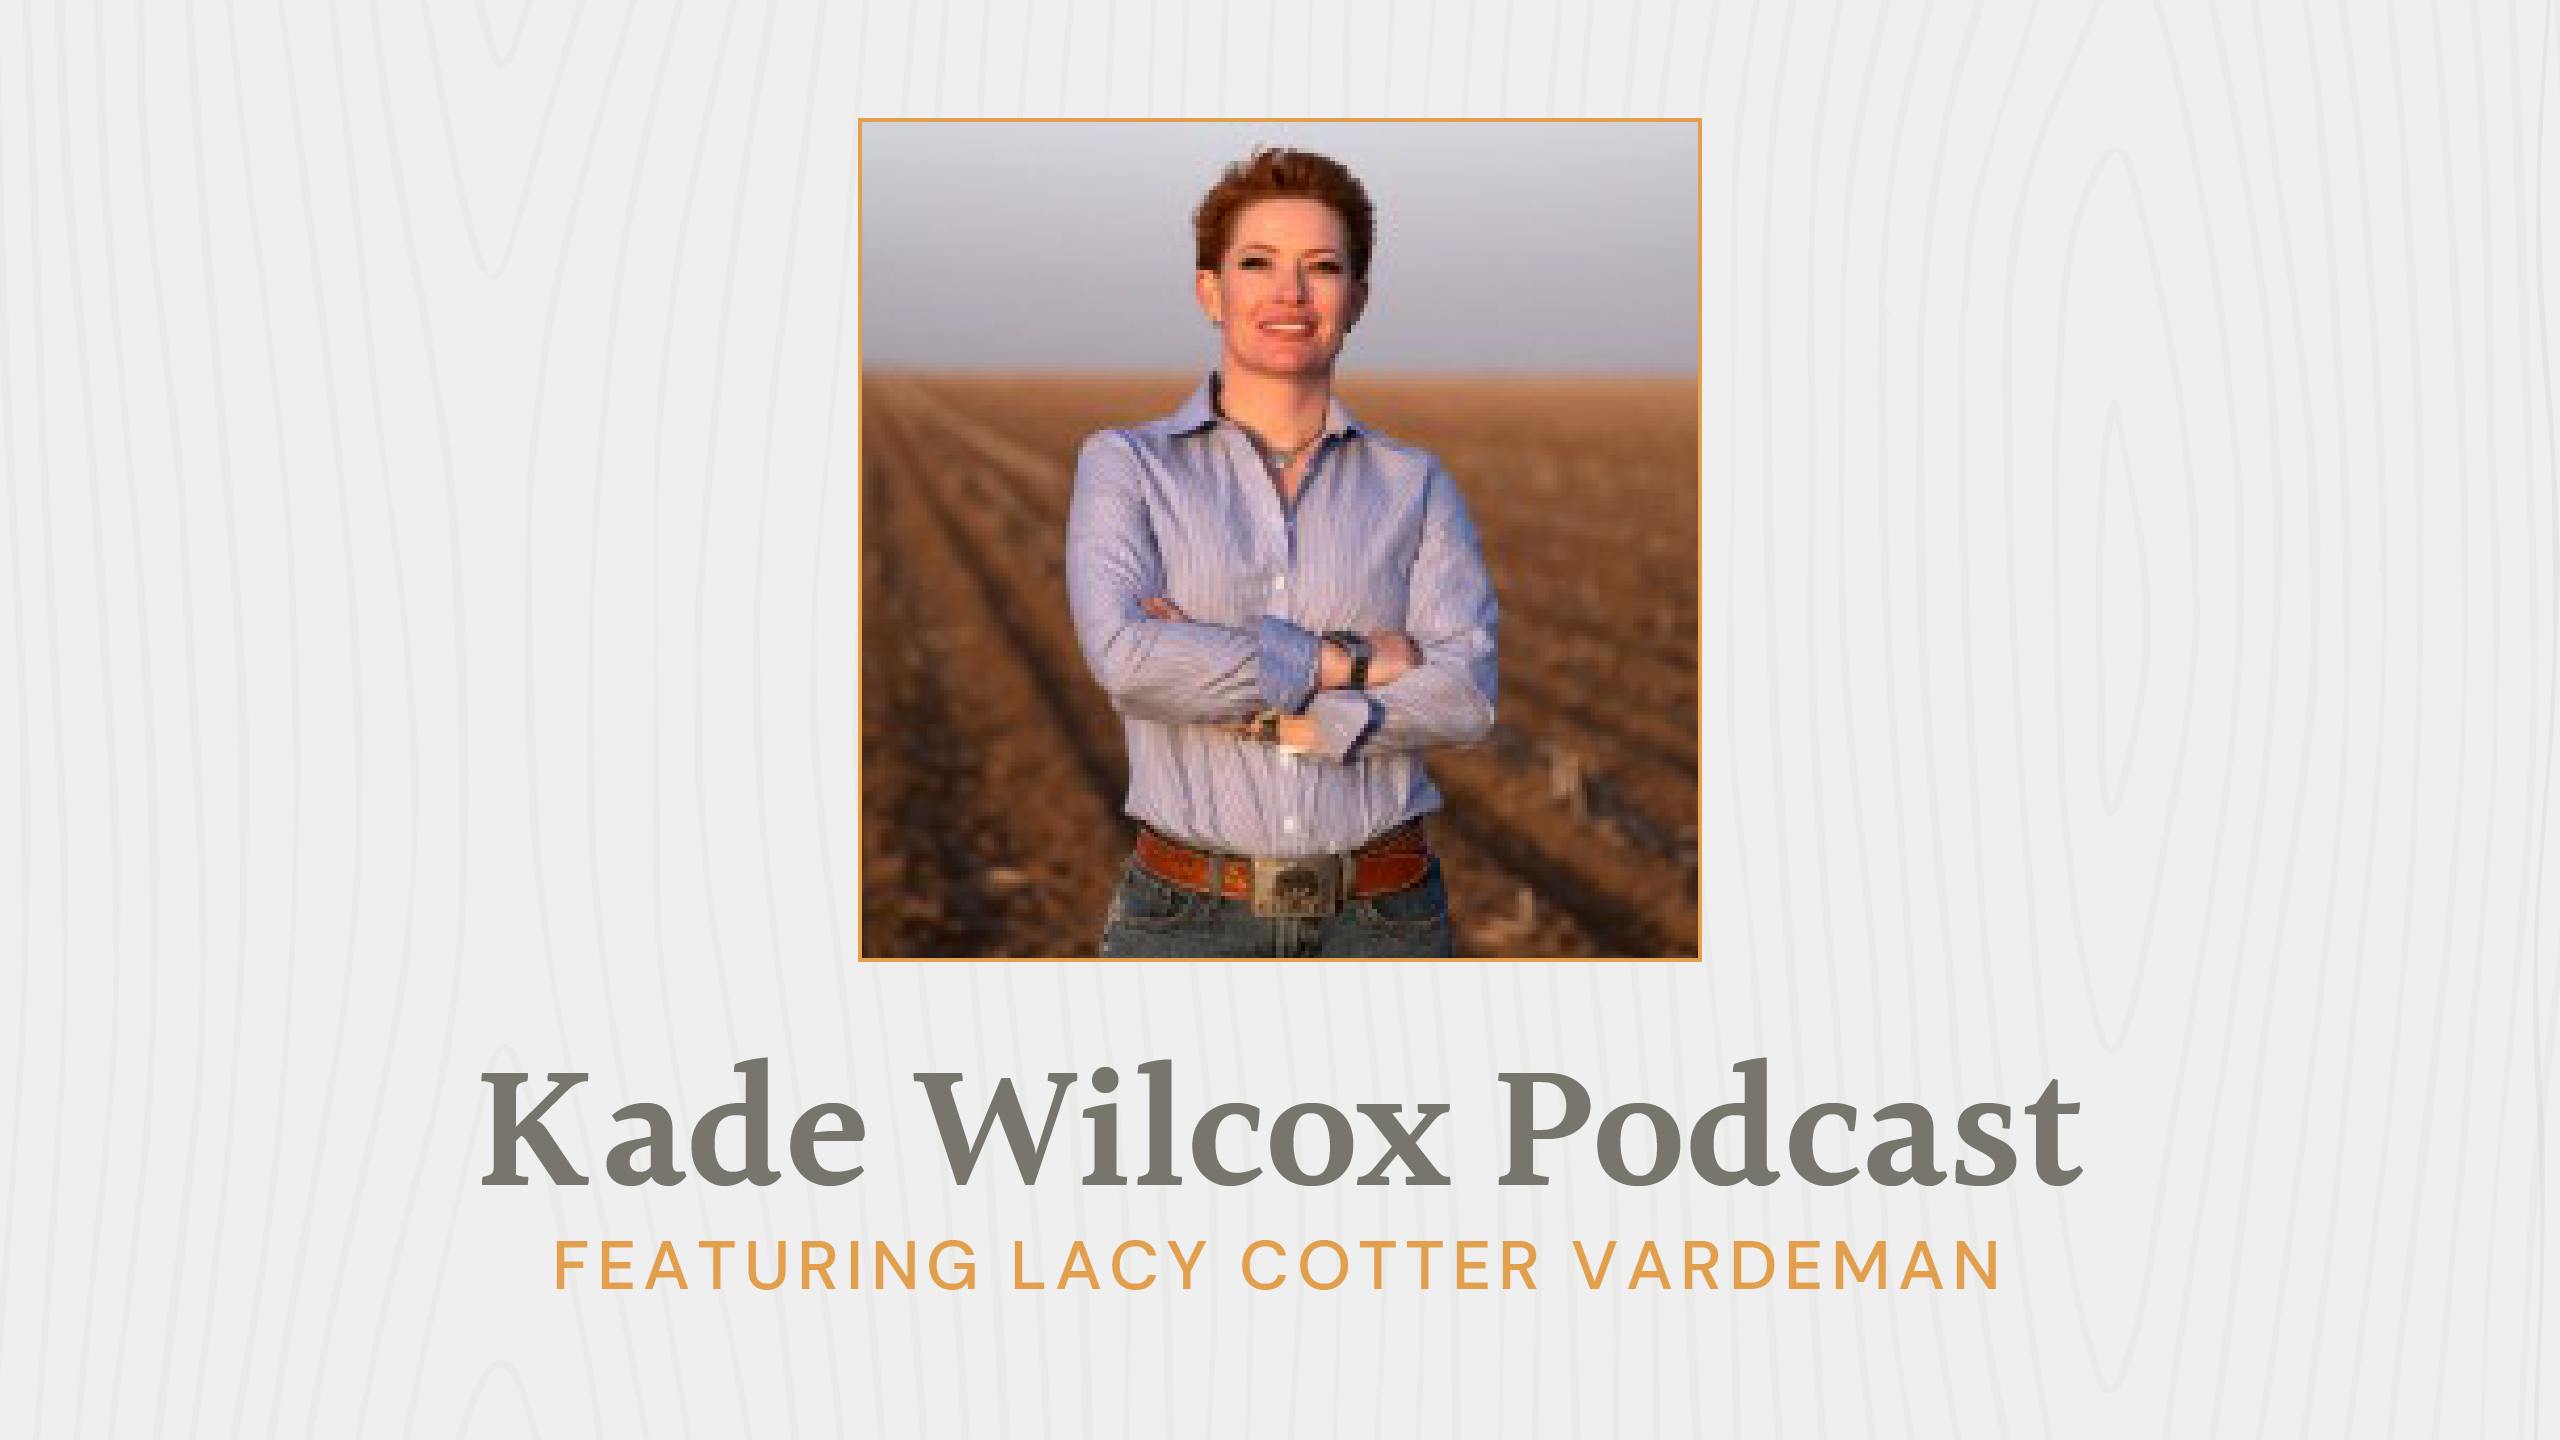 The Kade Wilcox Podcast: Lacy Cotter Vardeman image